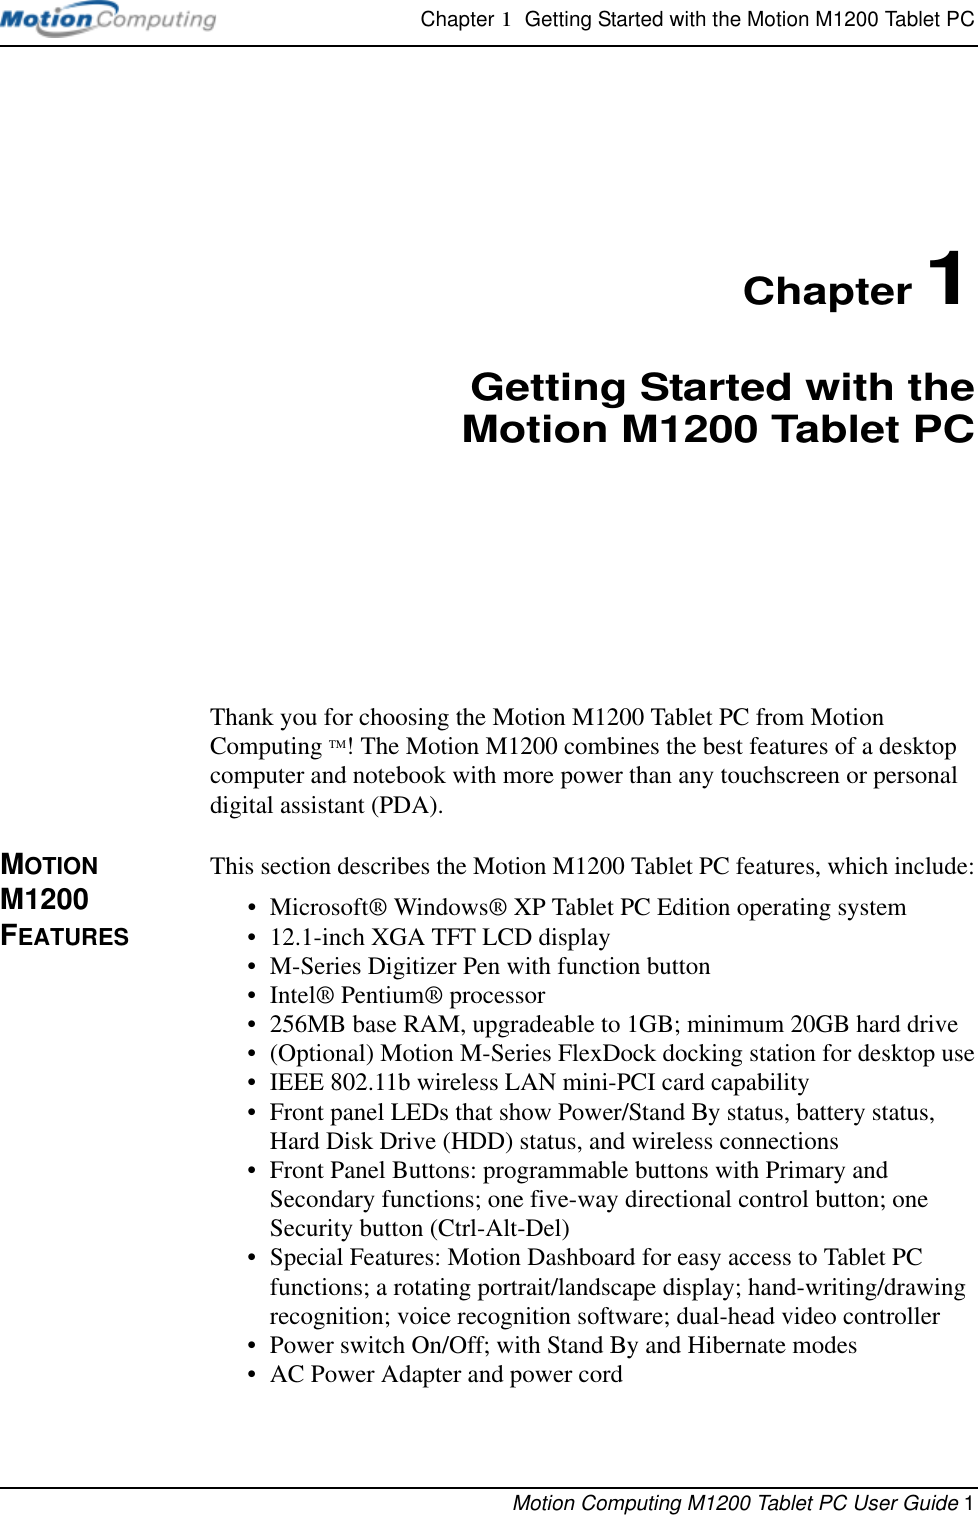 Chapter 1  Getting Started with the Motion M1200 Tablet PCMotion Computing M1200 Tablet PC User Guide 1Chapter 1Getting Started with theMotion M1200 Tablet PCThank you for choosing the Motion M1200 Tablet PC from Motion Computing TM! The Motion M1200 combines the best features of a desktop computer and notebook with more power than any touchscreen or personal digital assistant (PDA).MOTION M1200 FEATURESThis section describes the Motion M1200 Tablet PC features, which include:•Microsoft® Windows® XP Tablet PC Edition operating system• 12.1-inch XGA TFT LCD display • M-Series Digitizer Pen with function button•Intel® Pentium® processor• 256MB base RAM, upgradeable to 1GB; minimum 20GB hard drive• (Optional) Motion M-Series FlexDock docking station for desktop use• IEEE 802.11b wireless LAN mini-PCI card capability• Front panel LEDs that show Power/Stand By status, battery status, Hard Disk Drive (HDD) status, and wireless connections• Front Panel Buttons: programmable buttons with Primary and Secondary functions; one five-way directional control button; one Security button (Ctrl-Alt-Del)• Special Features: Motion Dashboard for easy access to Tablet PC functions; a rotating portrait/landscape display; hand-writing/drawing recognition; voice recognition software; dual-head video controller• Power switch On/Off; with Stand By and Hibernate modes• AC Power Adapter and power cord